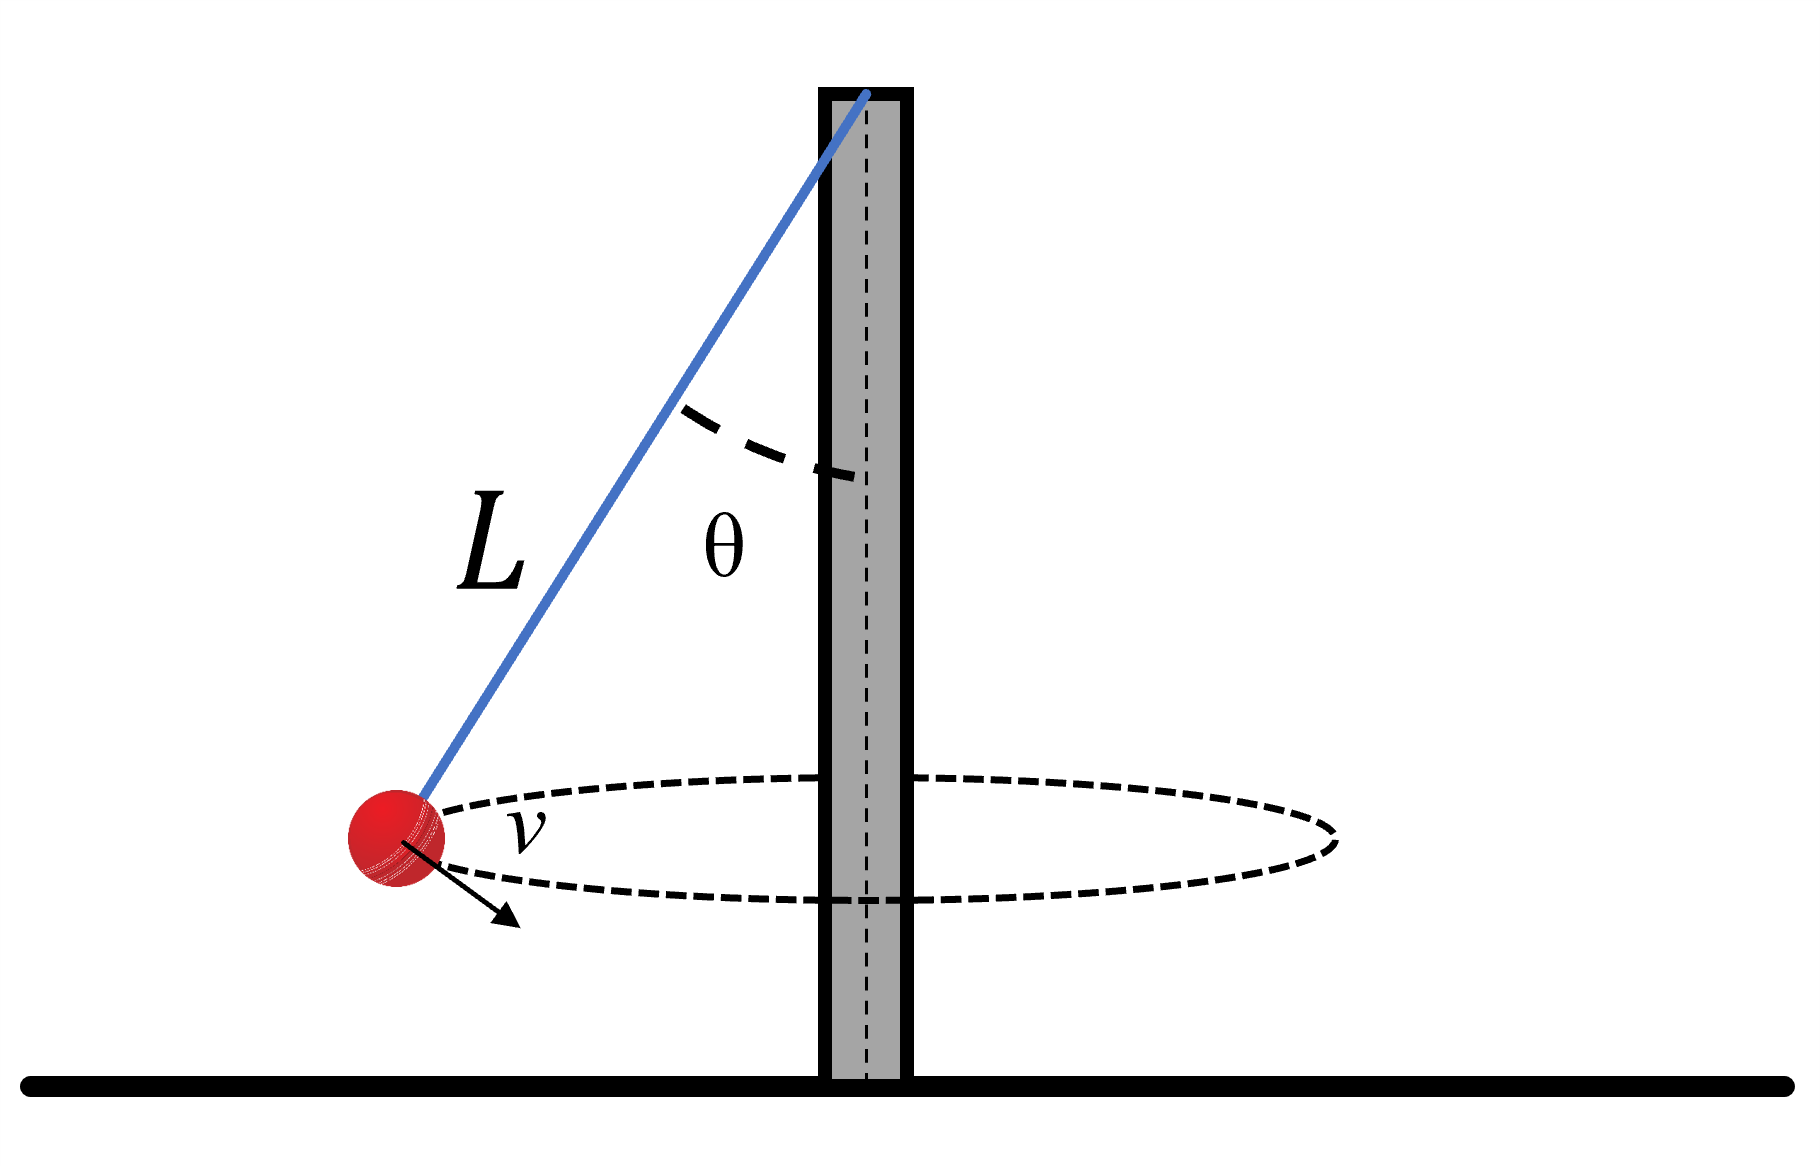 A ball attached to a pole via rope angled theta degrees.